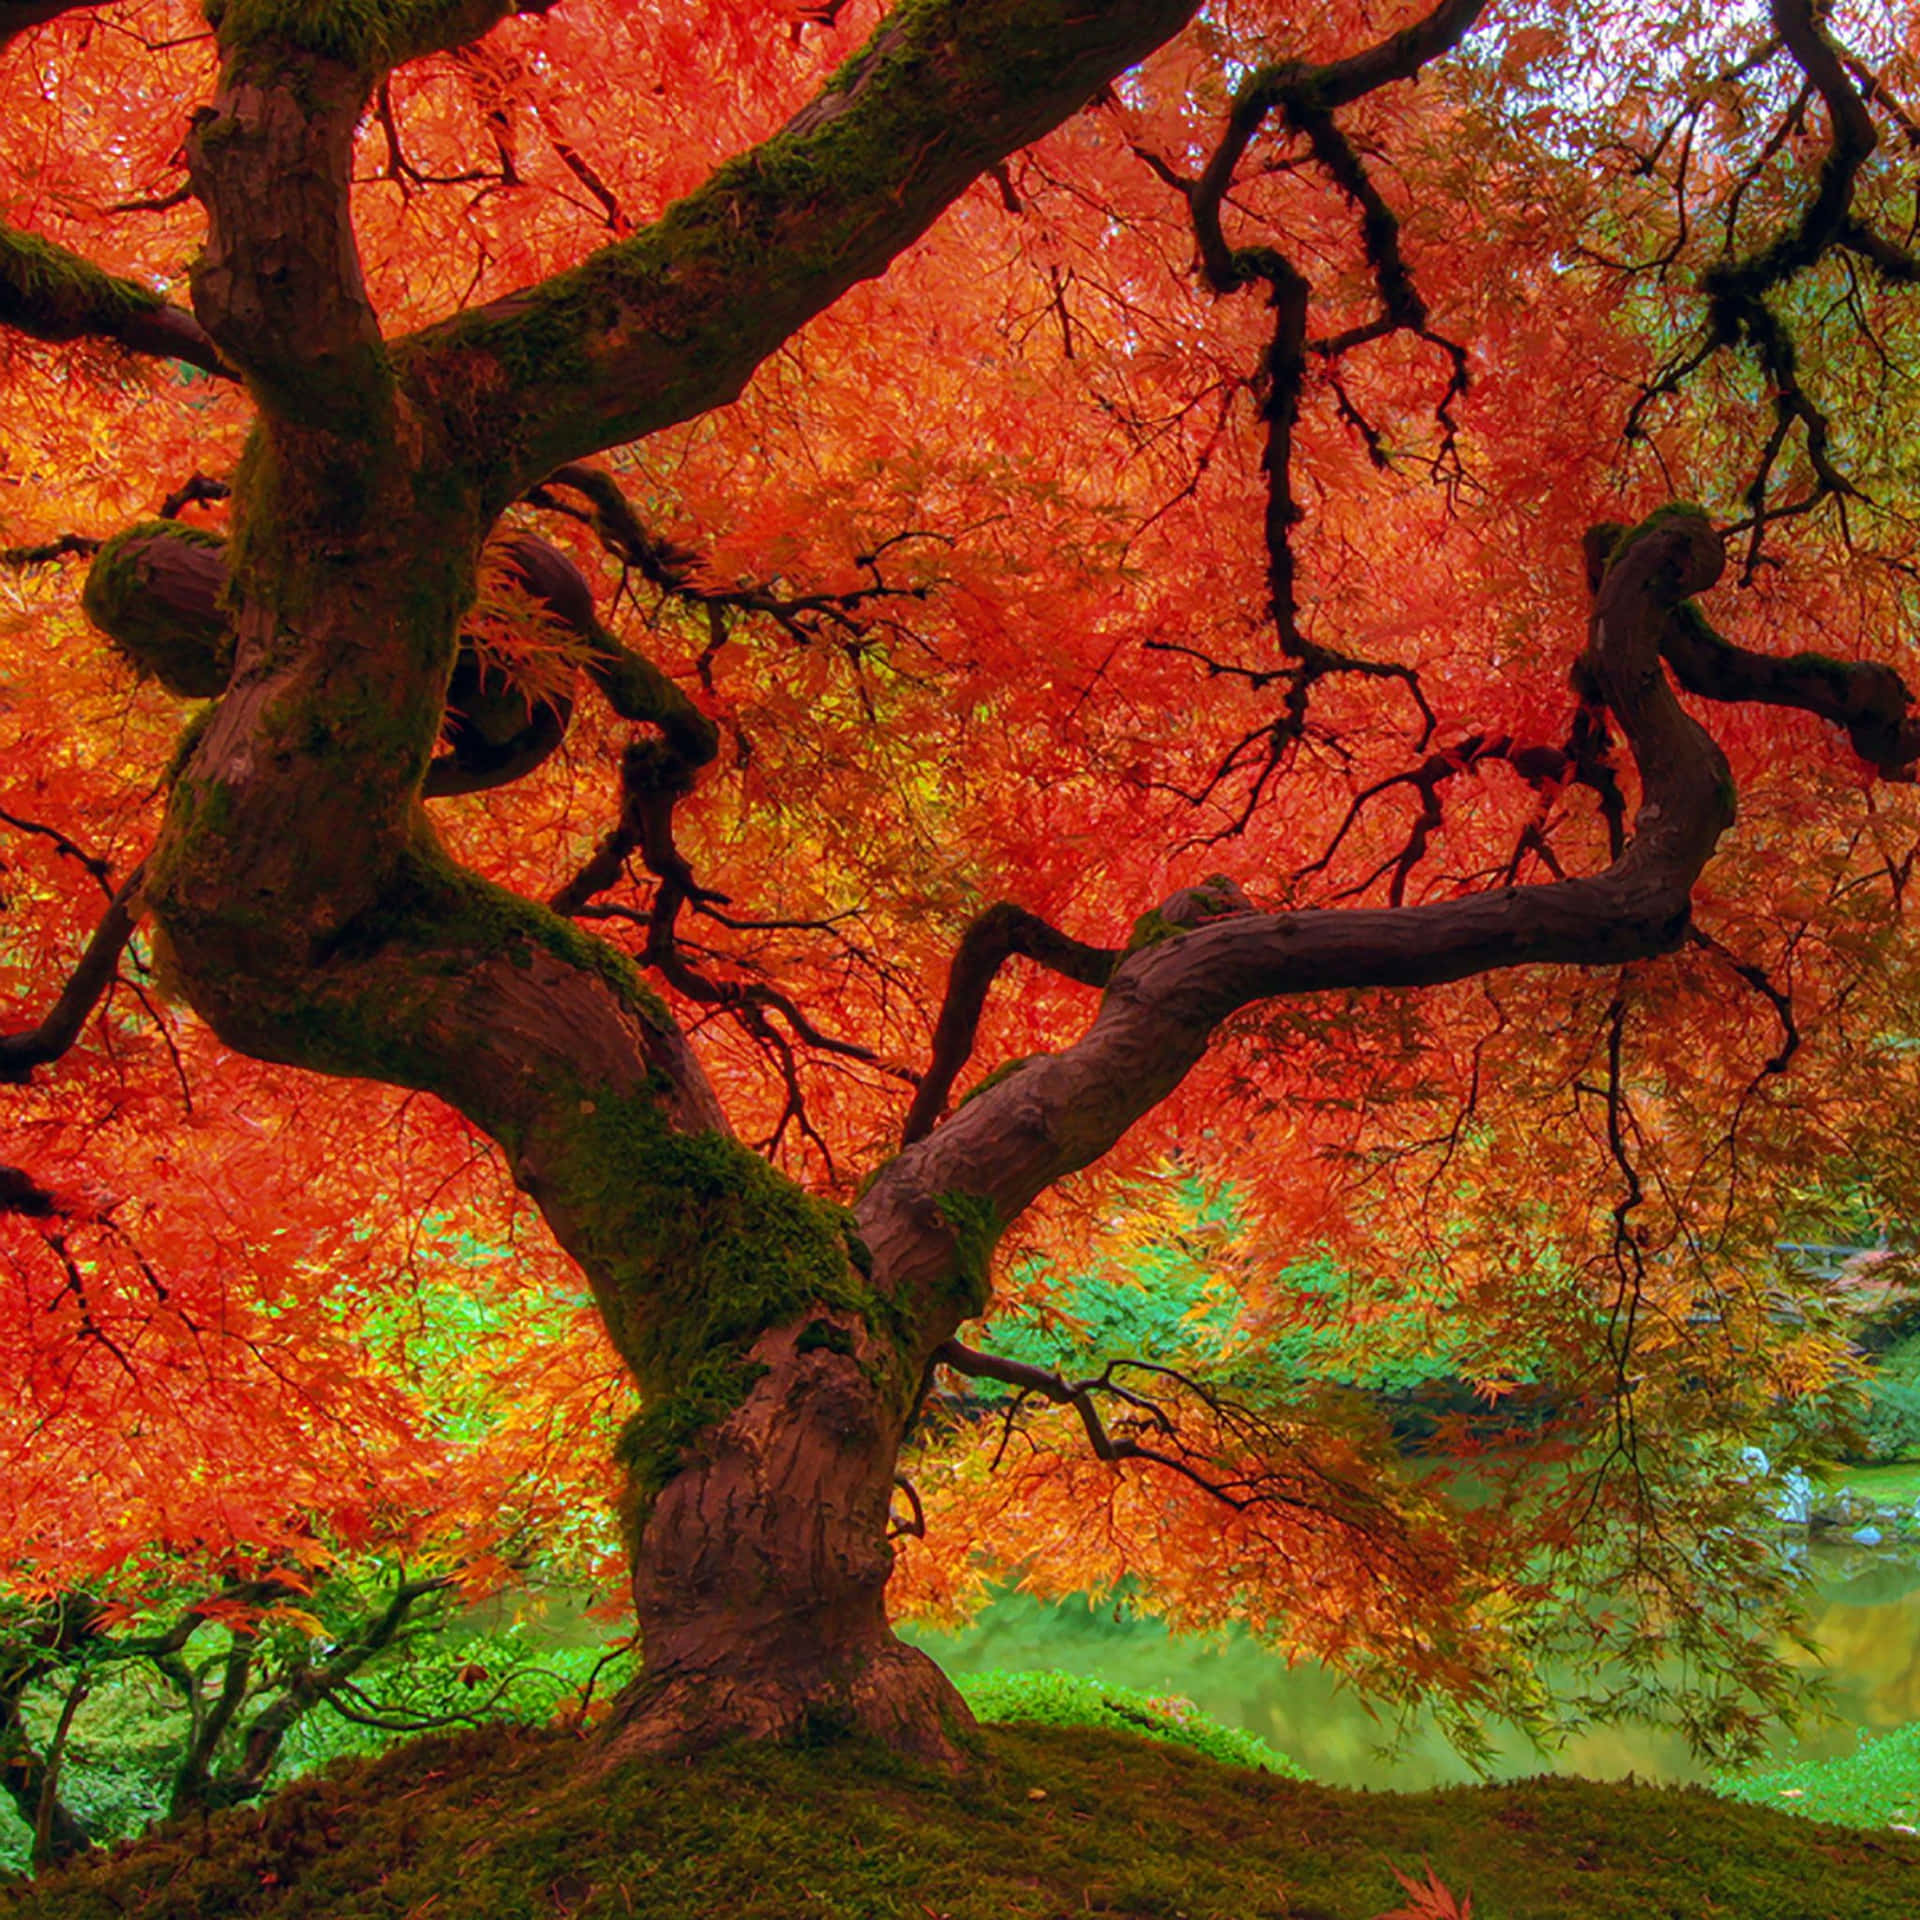 Enjoy the changing colors of Fall with the Ipad Wallpaper